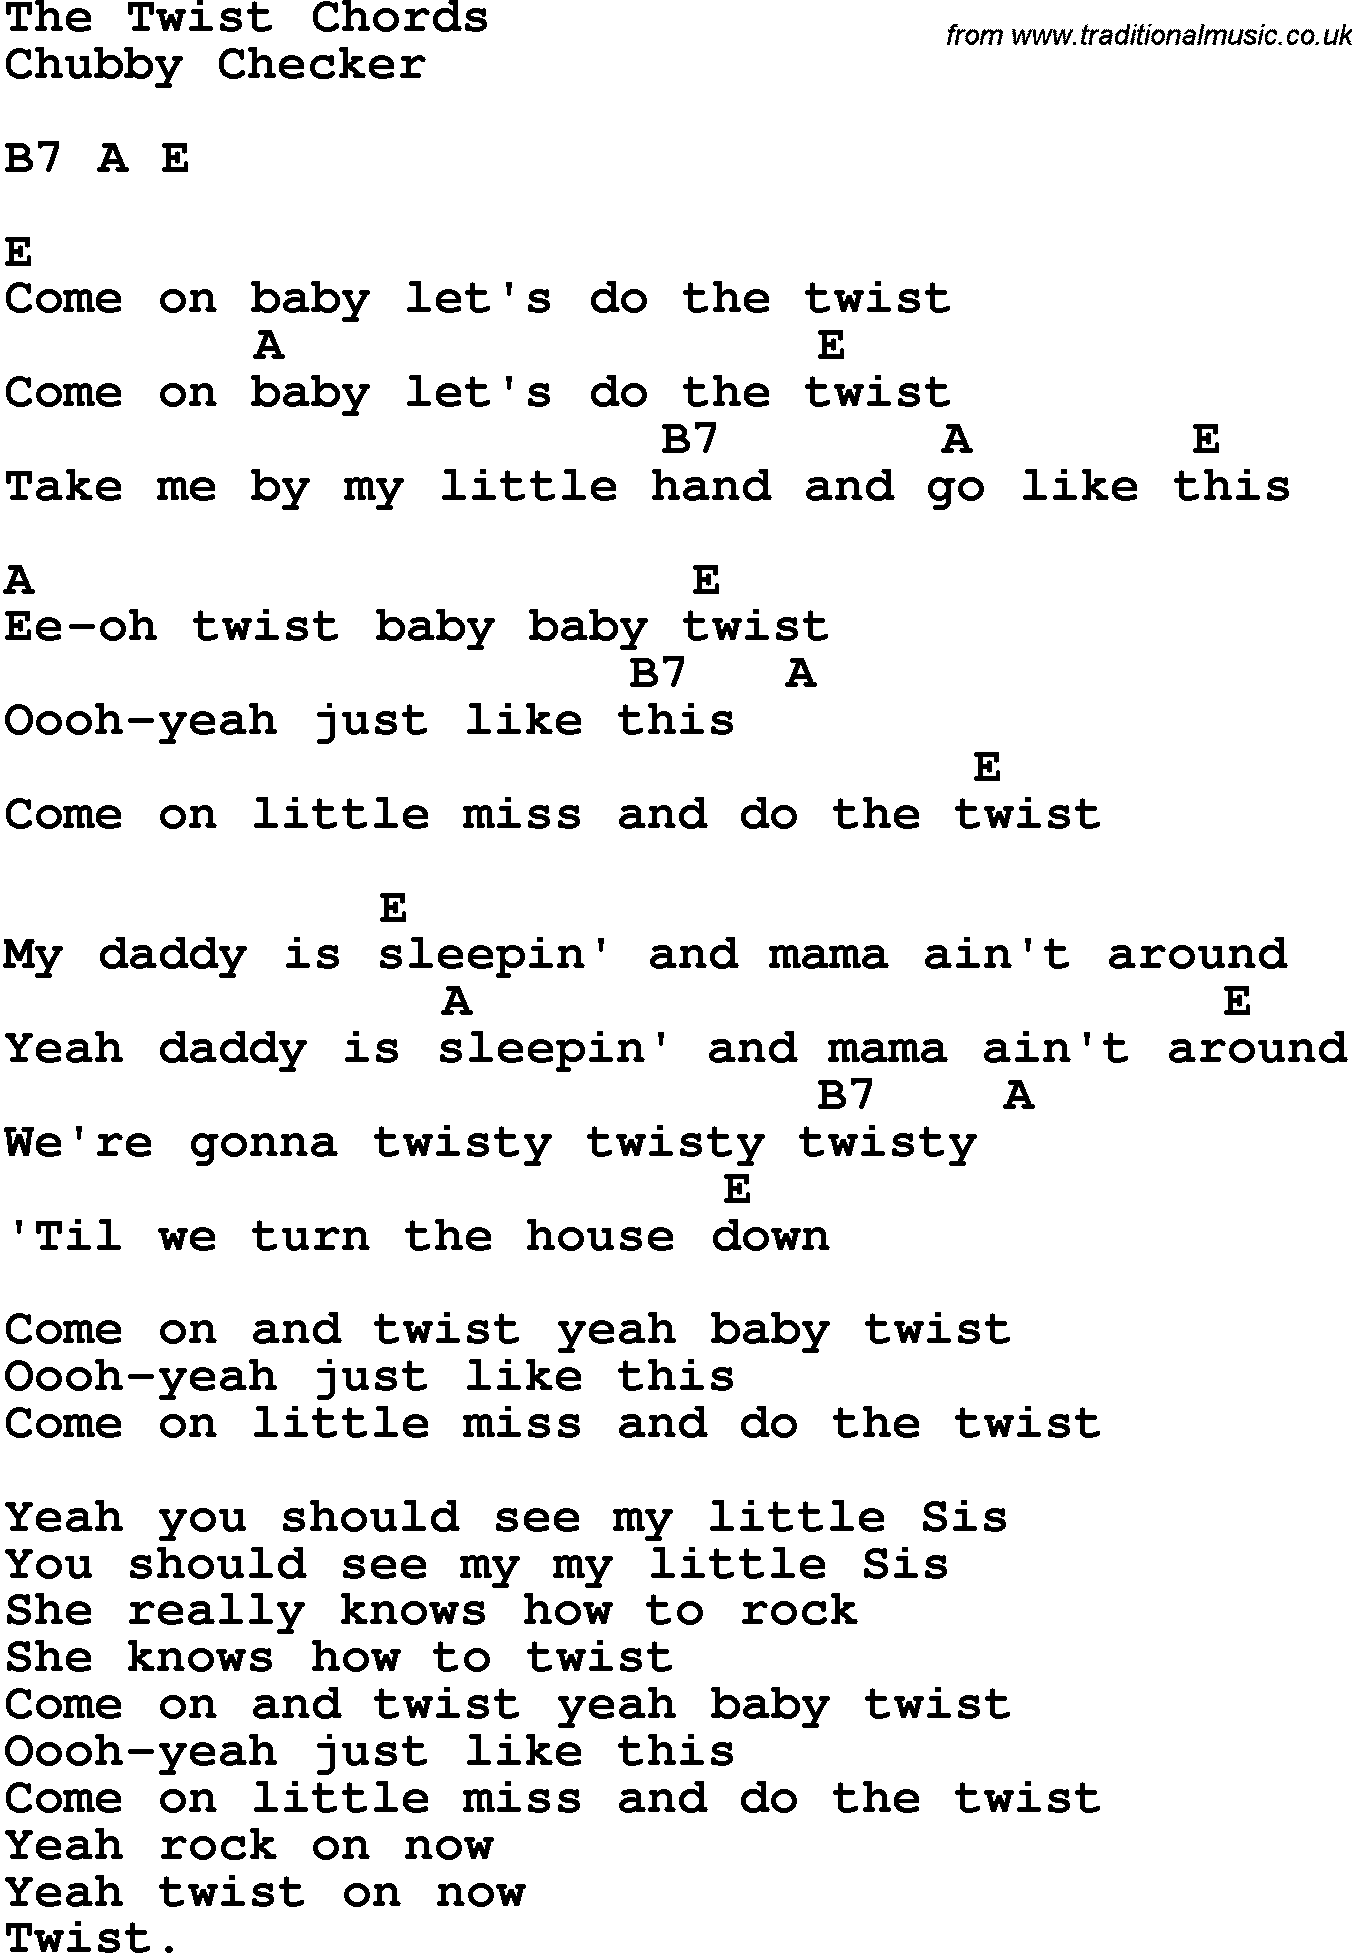 Song Lyrics with guitar chords for The Twist - Chubby Checker